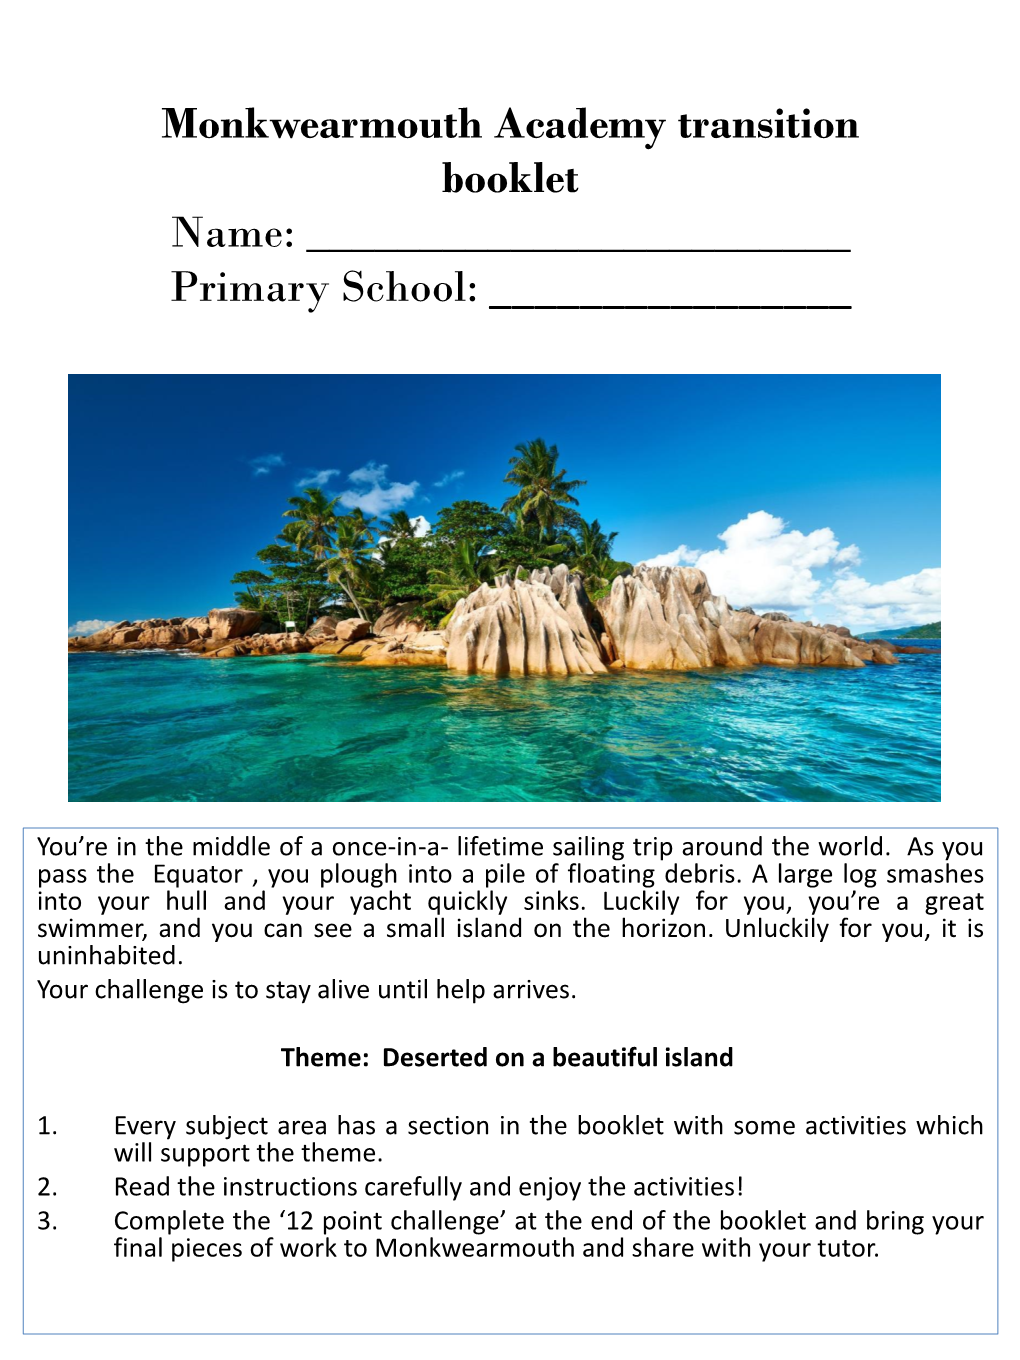 The Summer Transition Booklet